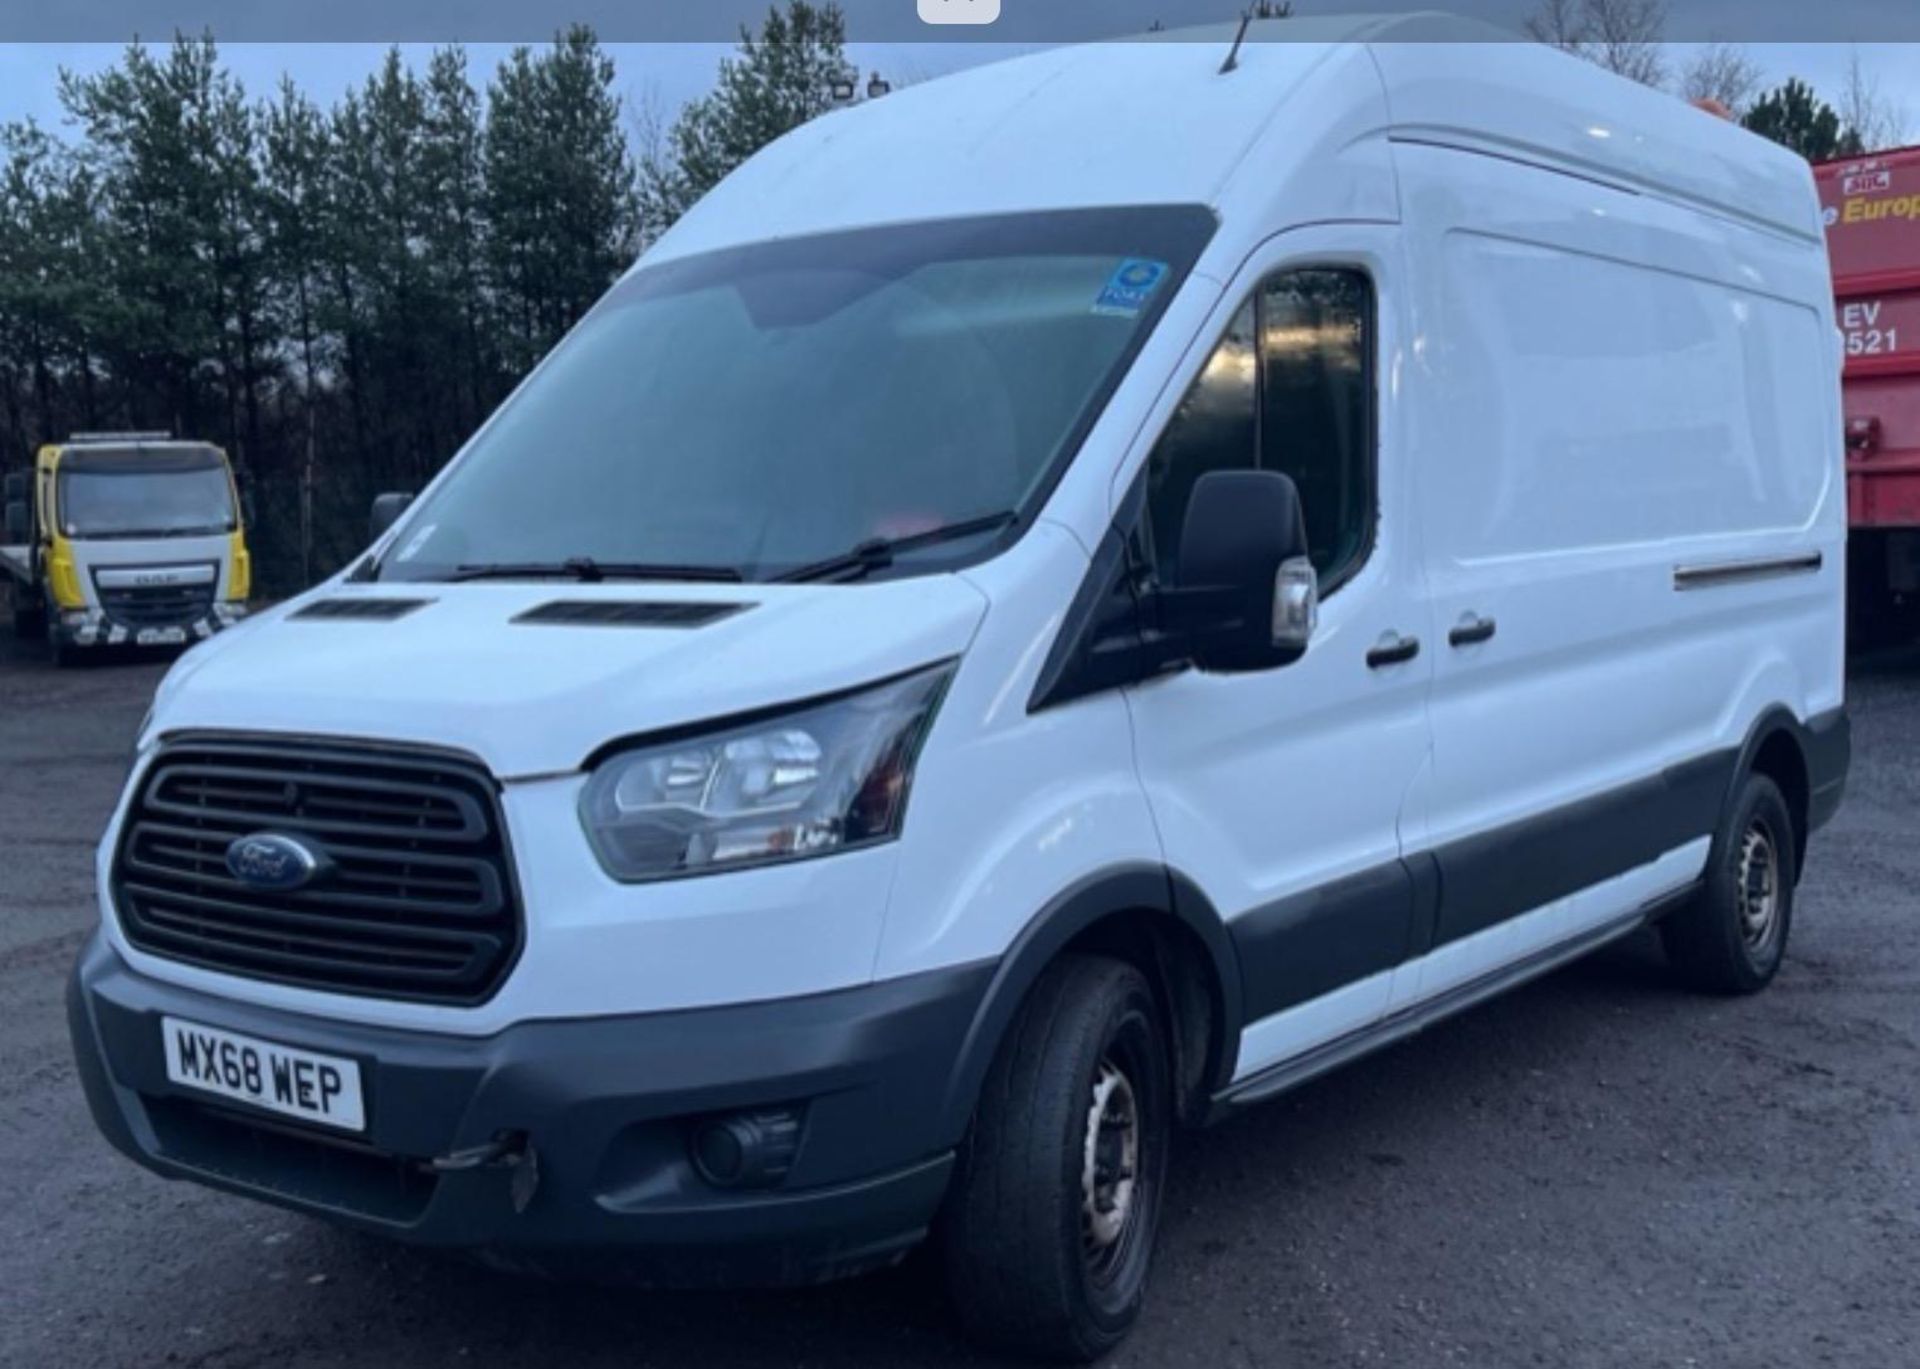 2018 FORD TRANSIT - 180K MILES - HPI CLEAR- READY FOR ACTION! - Image 9 of 10